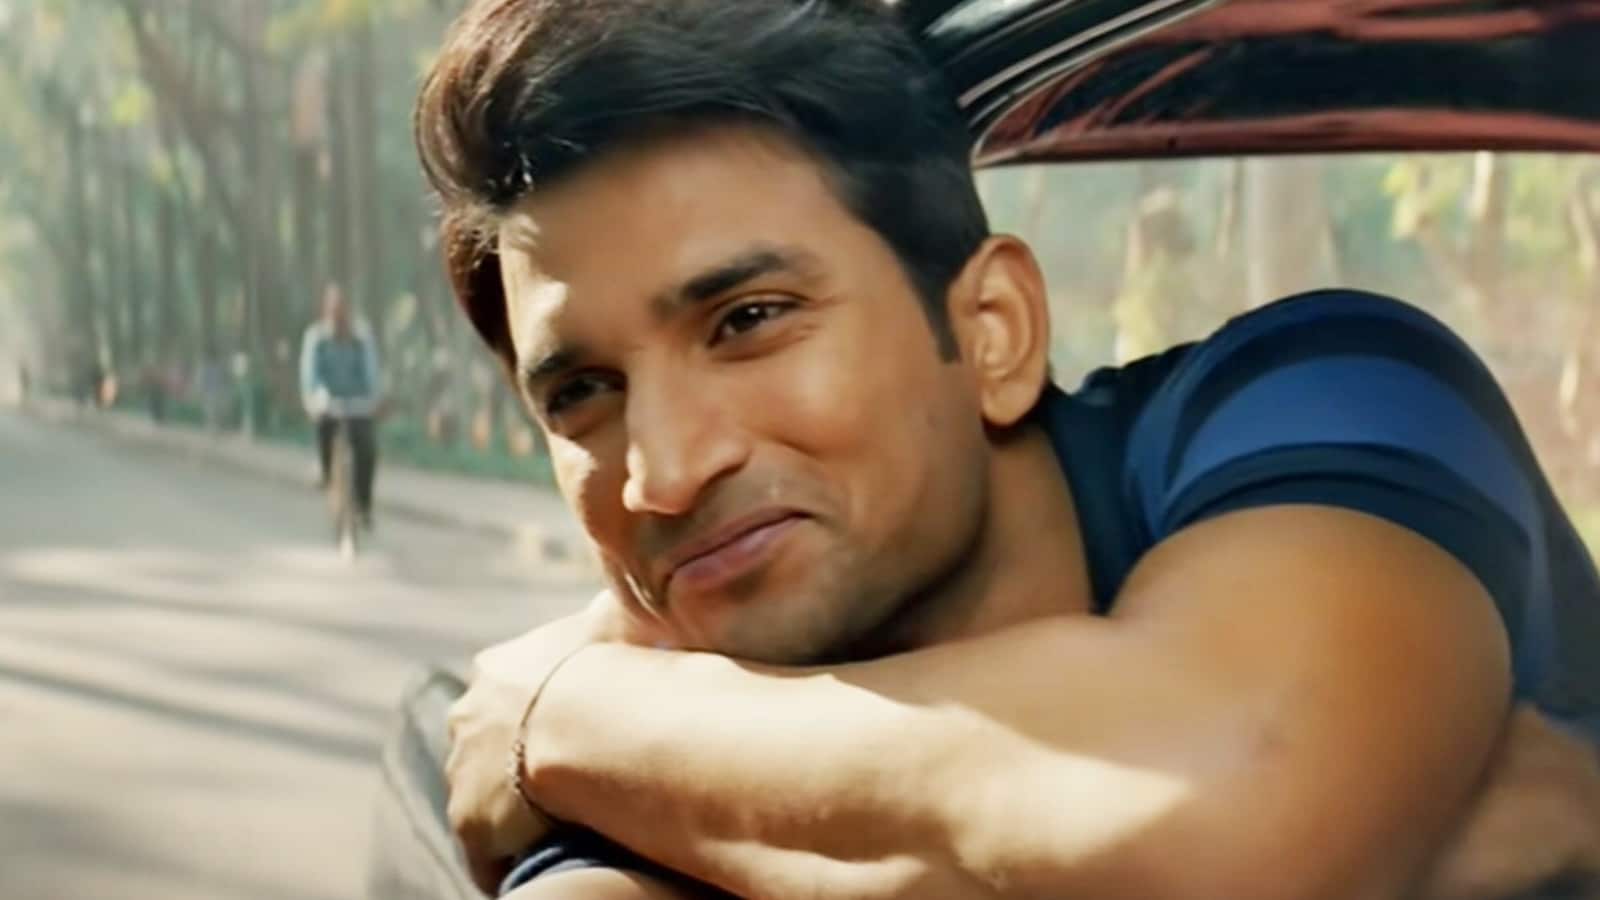 “Spectacular Compilation of Sushant Singh Rajput Images in Full 4K Resolution – Over 999 Shots”